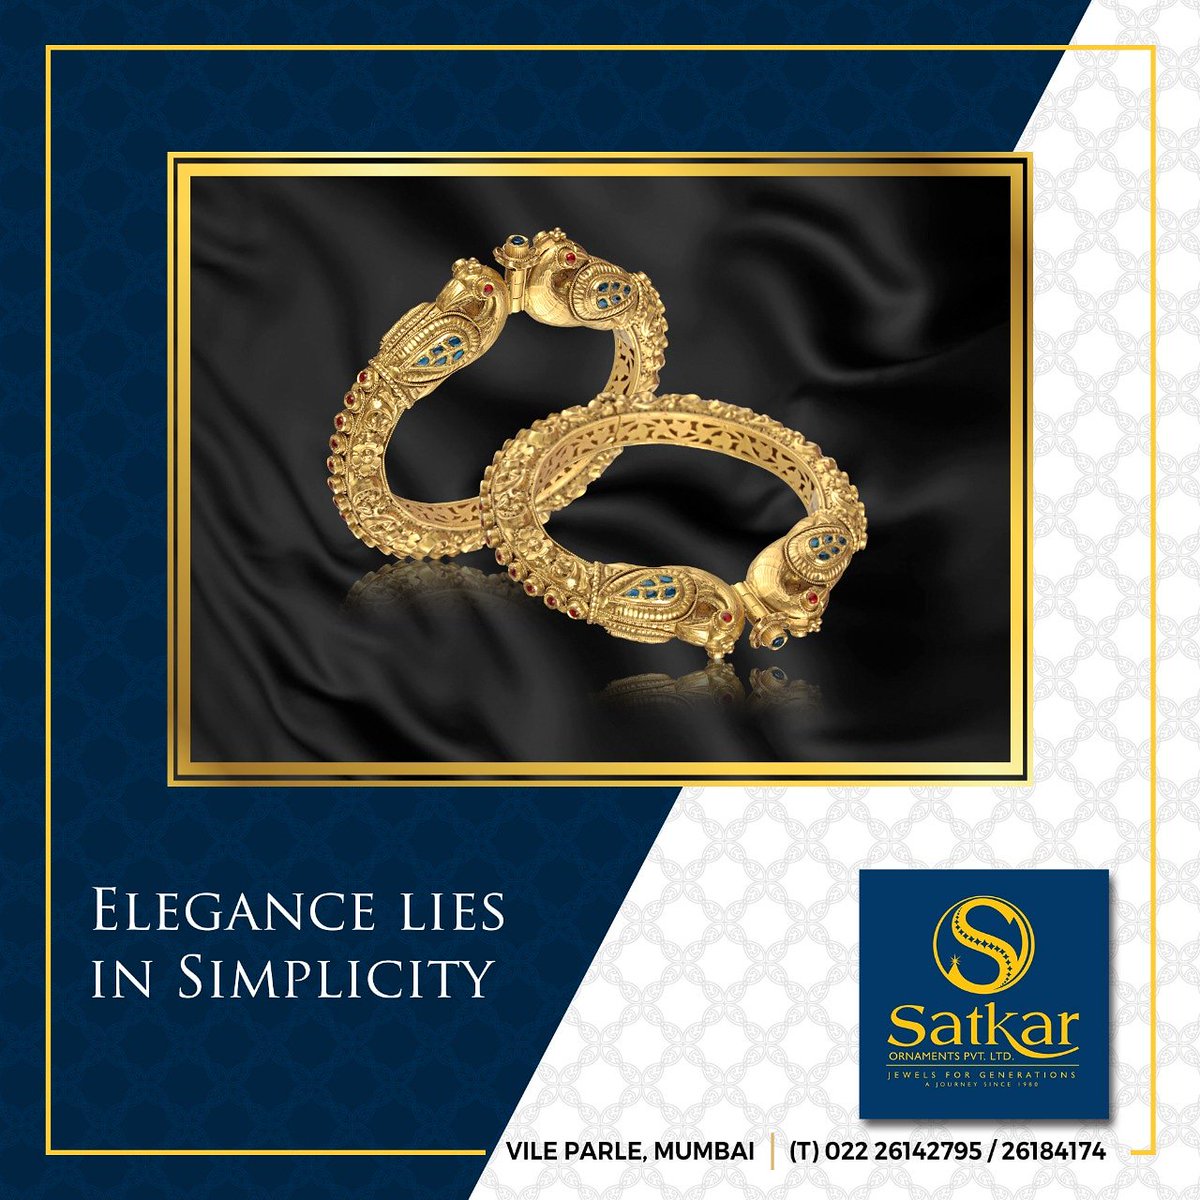 Rich Embellished Designs for the woman with Exquisite Taste because Elegance lies in Simplicity !!!

#SatkarOrnaments #Mumbai #VileParle #Kadas #Bangles #DesignerKadas #ExquisiteDesigns #TraditionalCollection #Elegance #Simplicity #AdornTheBeauty #WearItWithPride